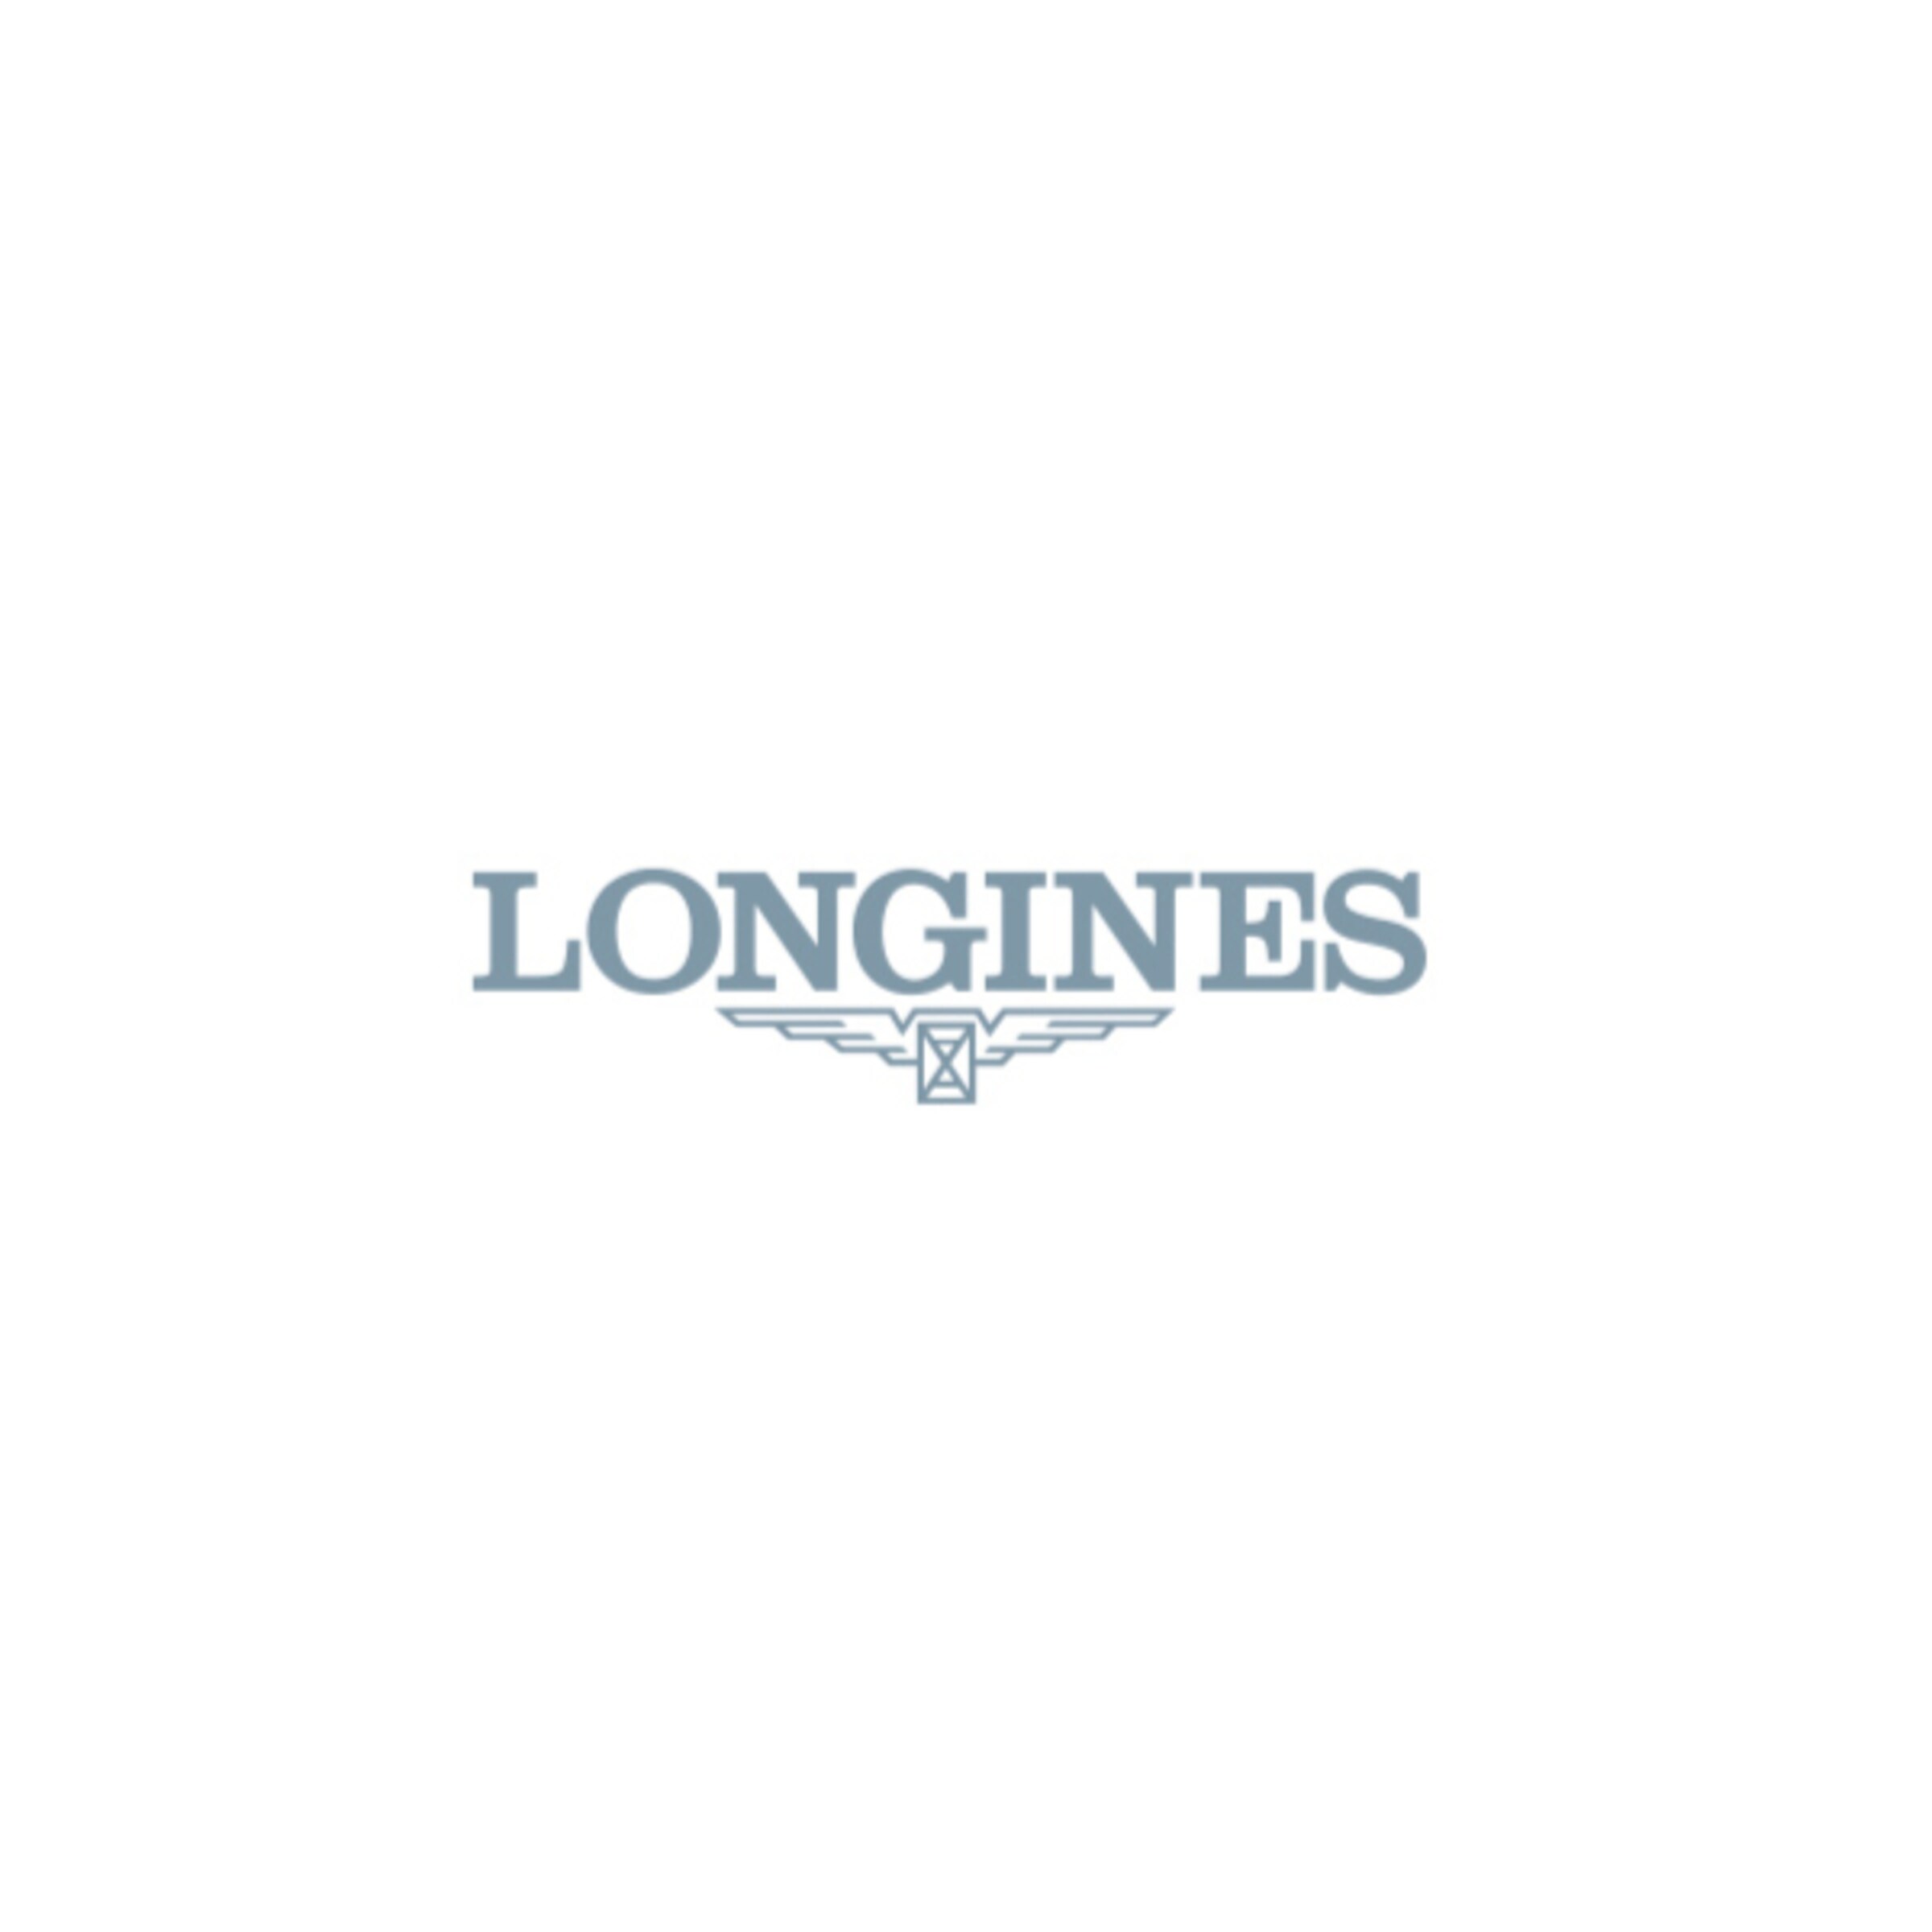 Longines THE LONGINES MASTER COLLECTION Automatic 18 karat pink gold Watch - L2.128.8.87.3